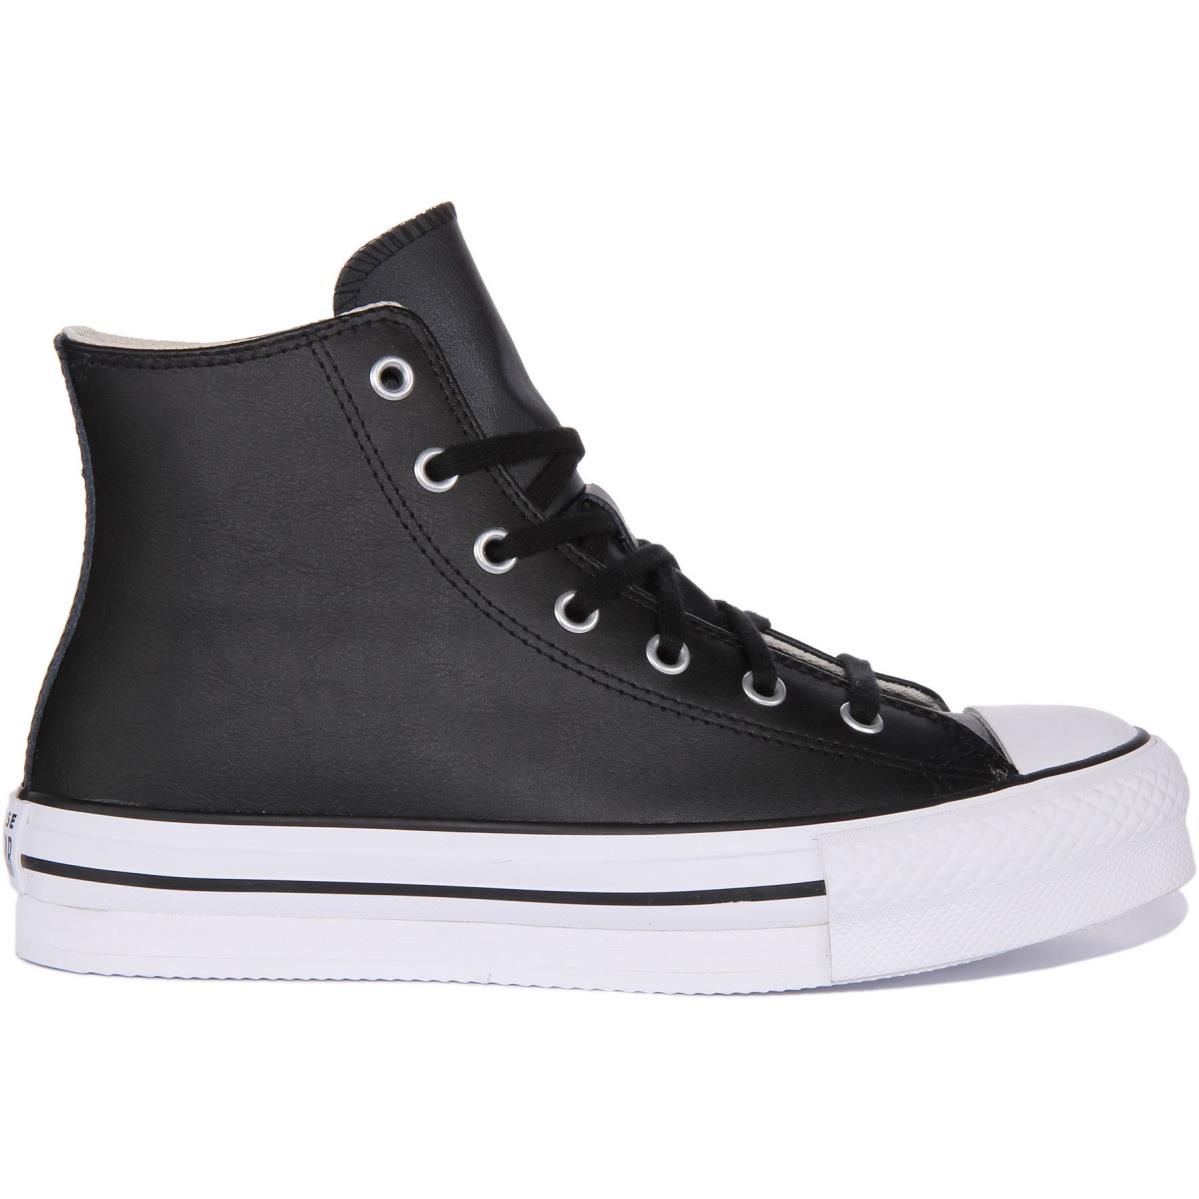 Converse A02485C Ct As Lift Hi Youth High Sneaker In Black White Size US 3Y - 6Y